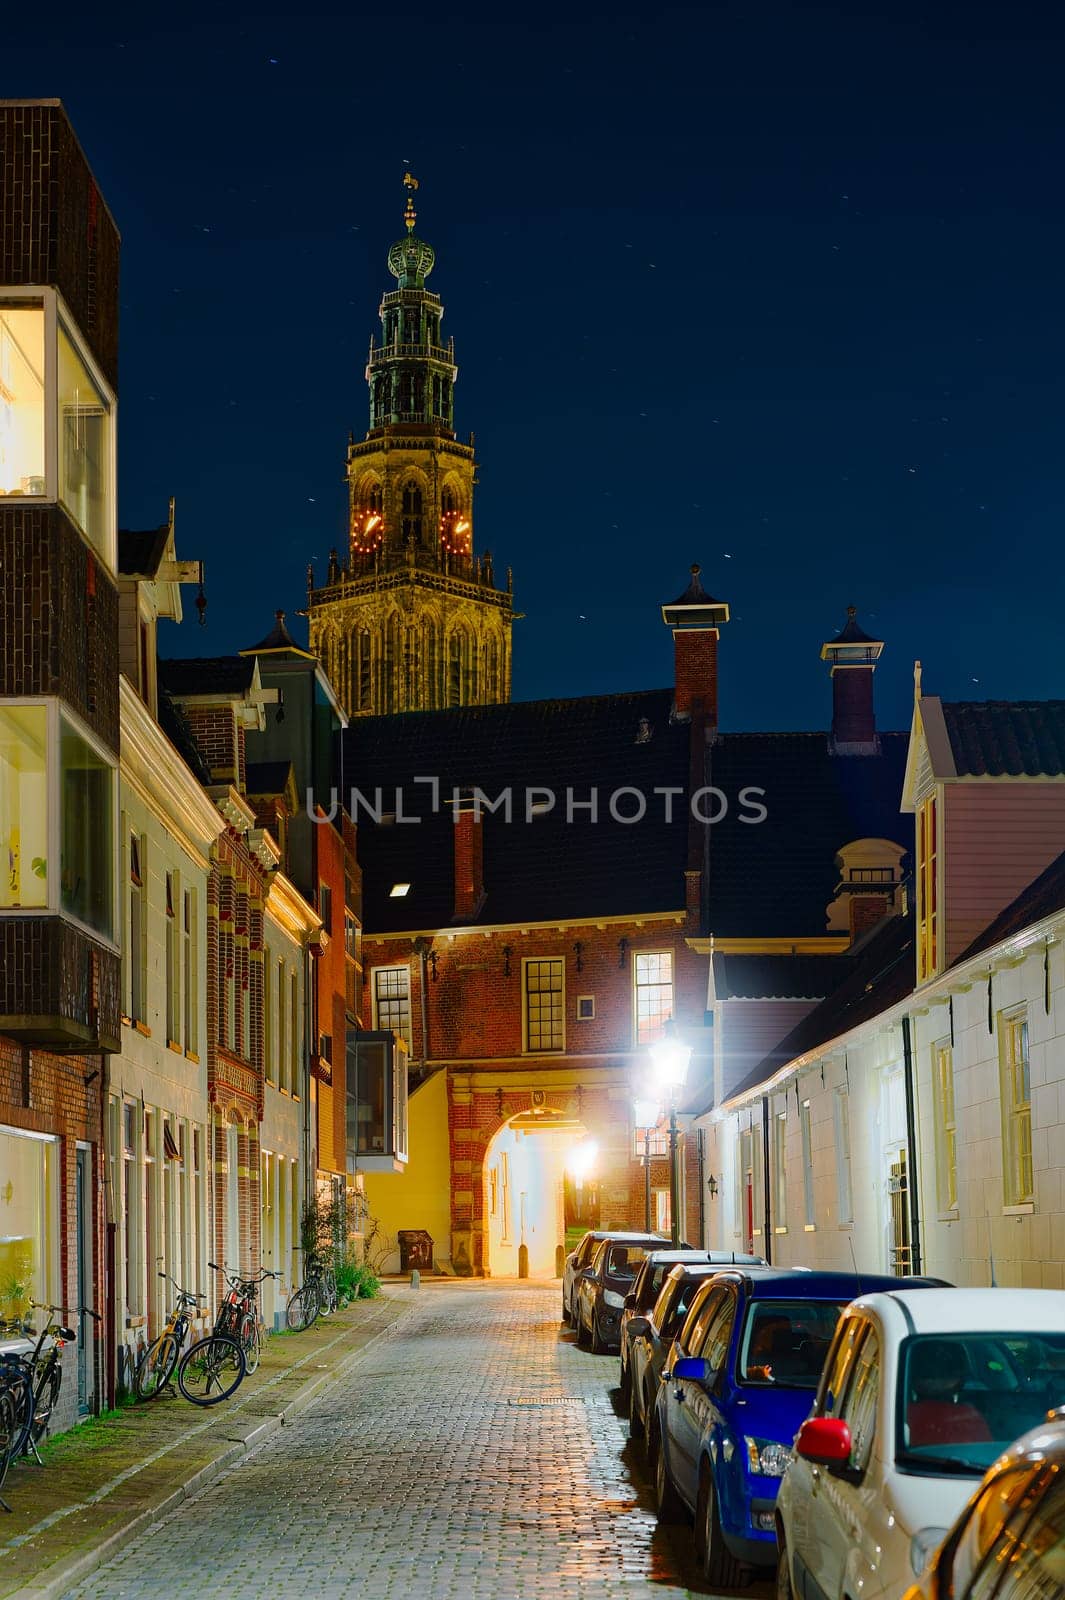 Groningen, Netherlands night Cityscape photographed at night. Groningen during a clear evening. by PhotoTime